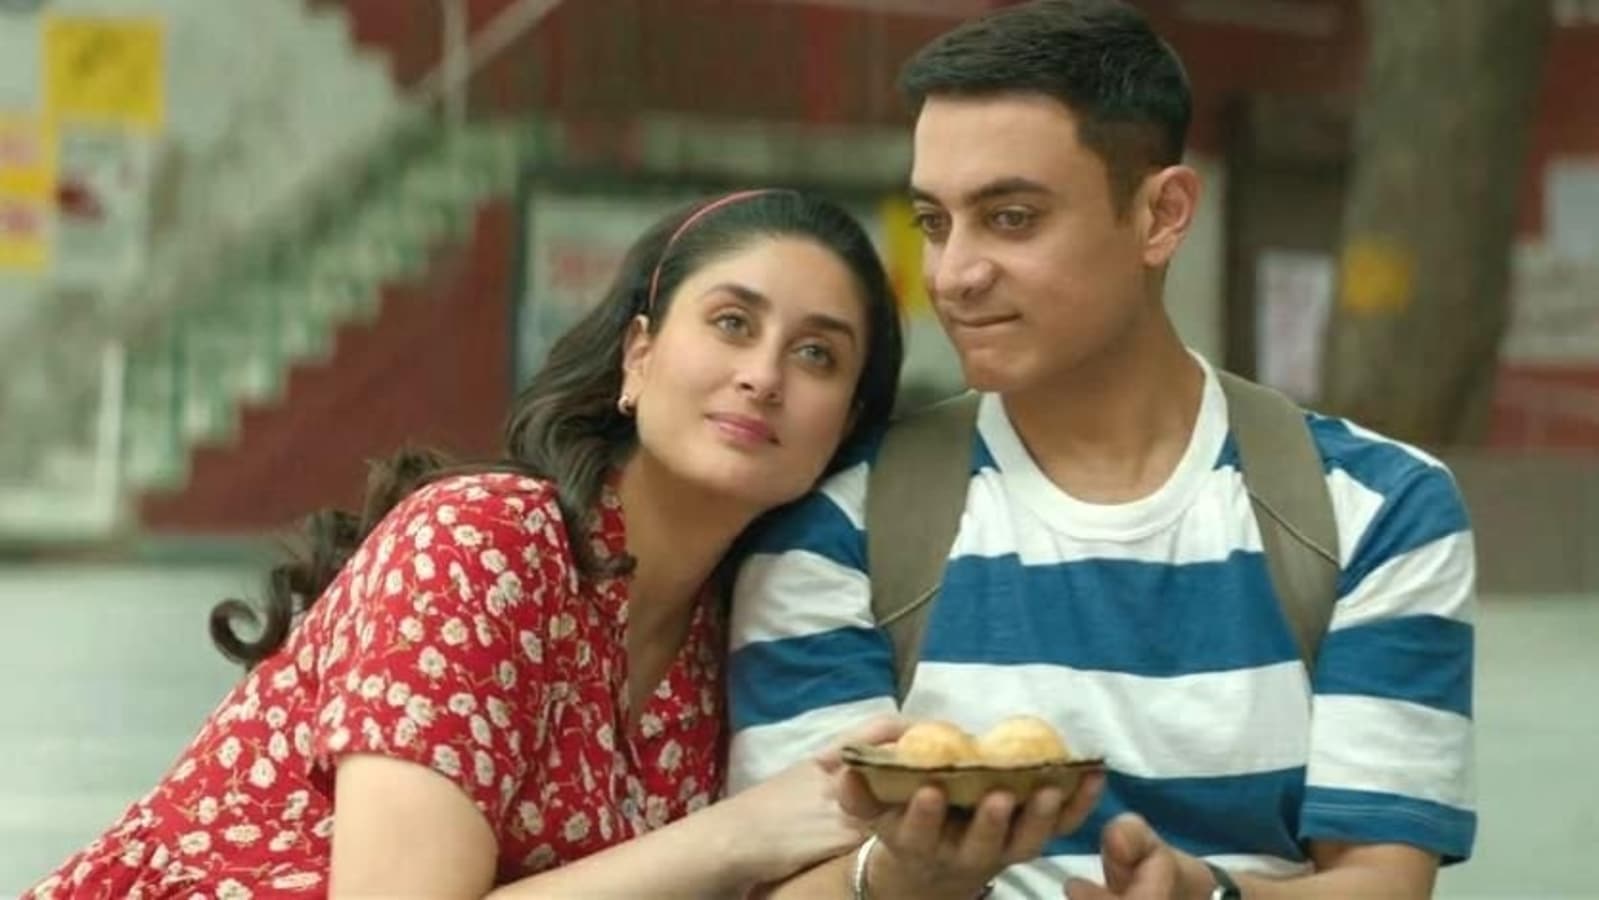 after-failing-at-the-box-office-aamir-khan-s-laal-singh-chaddha-is-now-number-2-non-english-film-globally-on-netflix